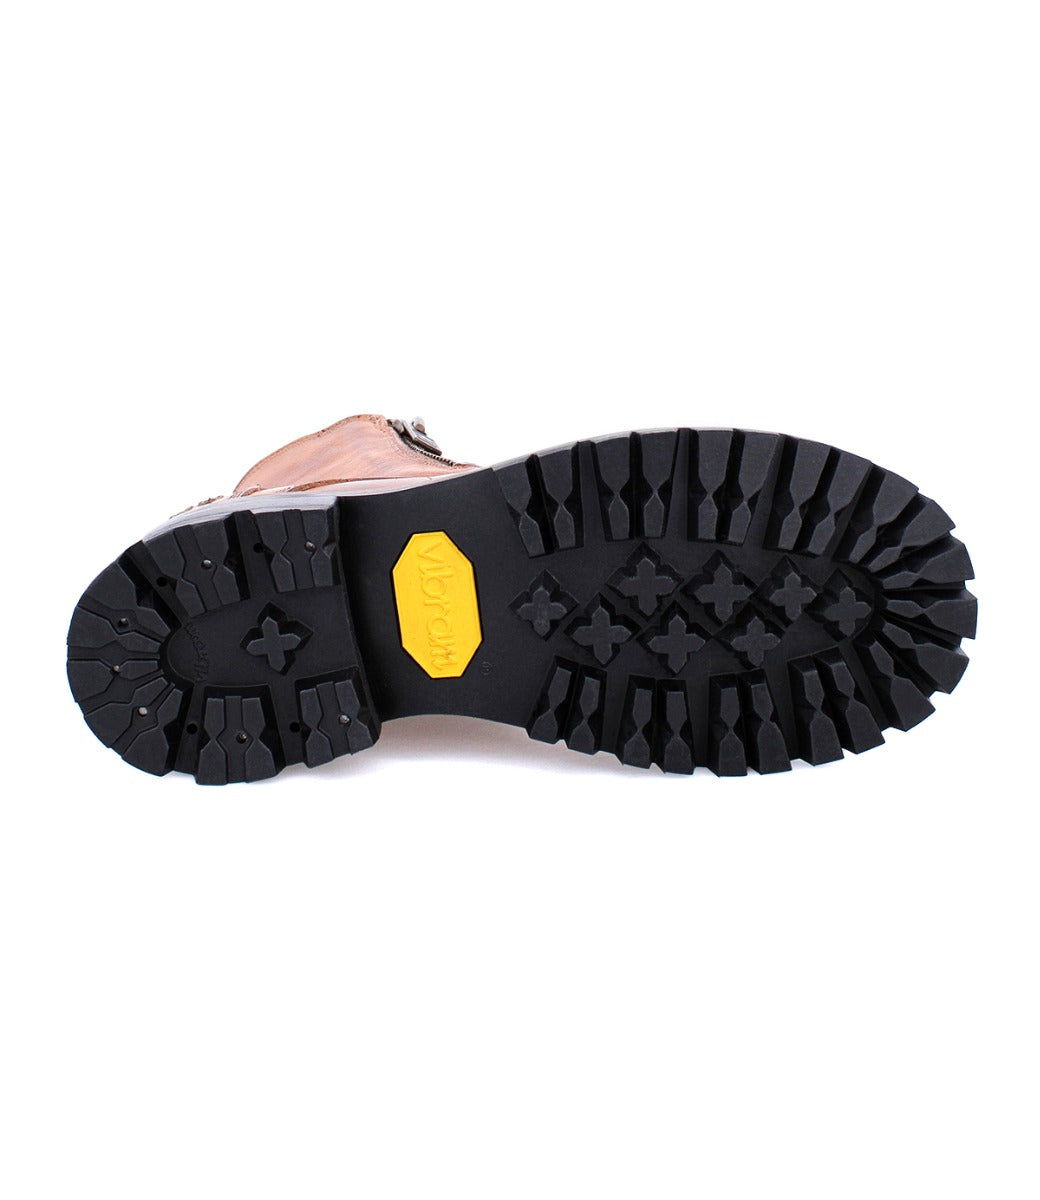 A pair of Tactic Trek hiking boots with yellow soles on a white background made by Bed Stu.